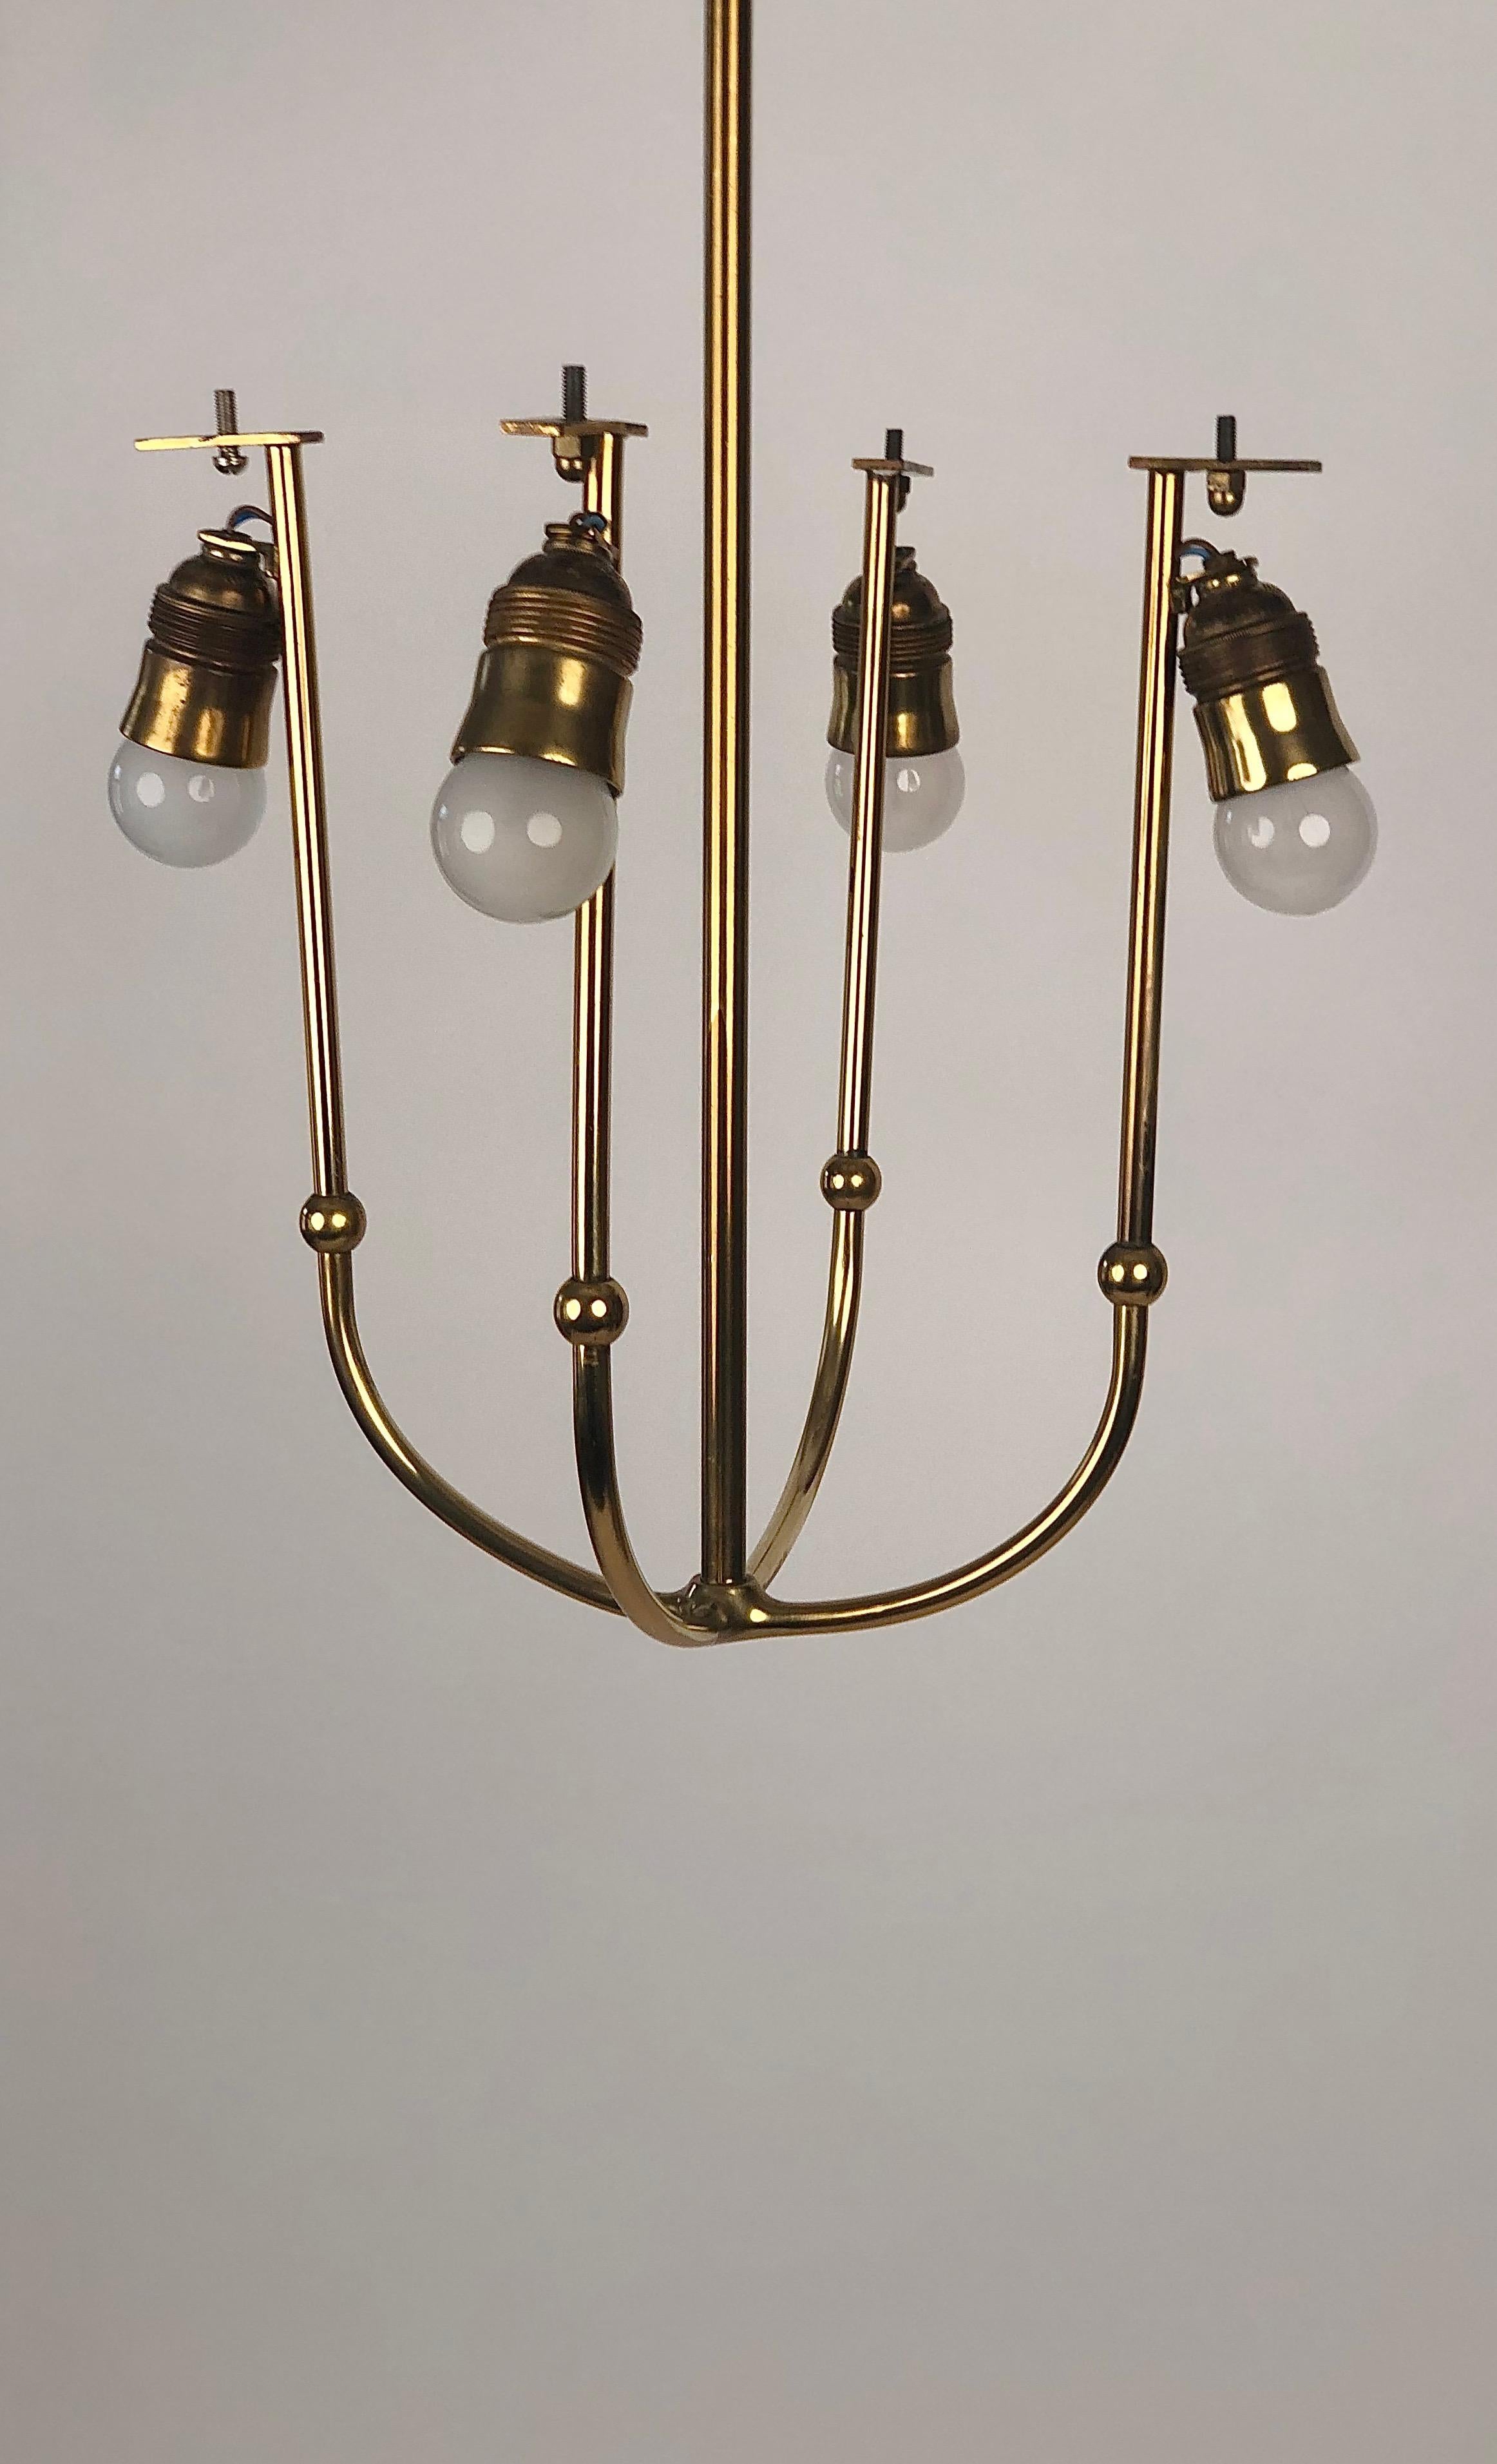 Four Arm Chandelier in Brass with Silk Shades , 1930's, Austria For Sale 8